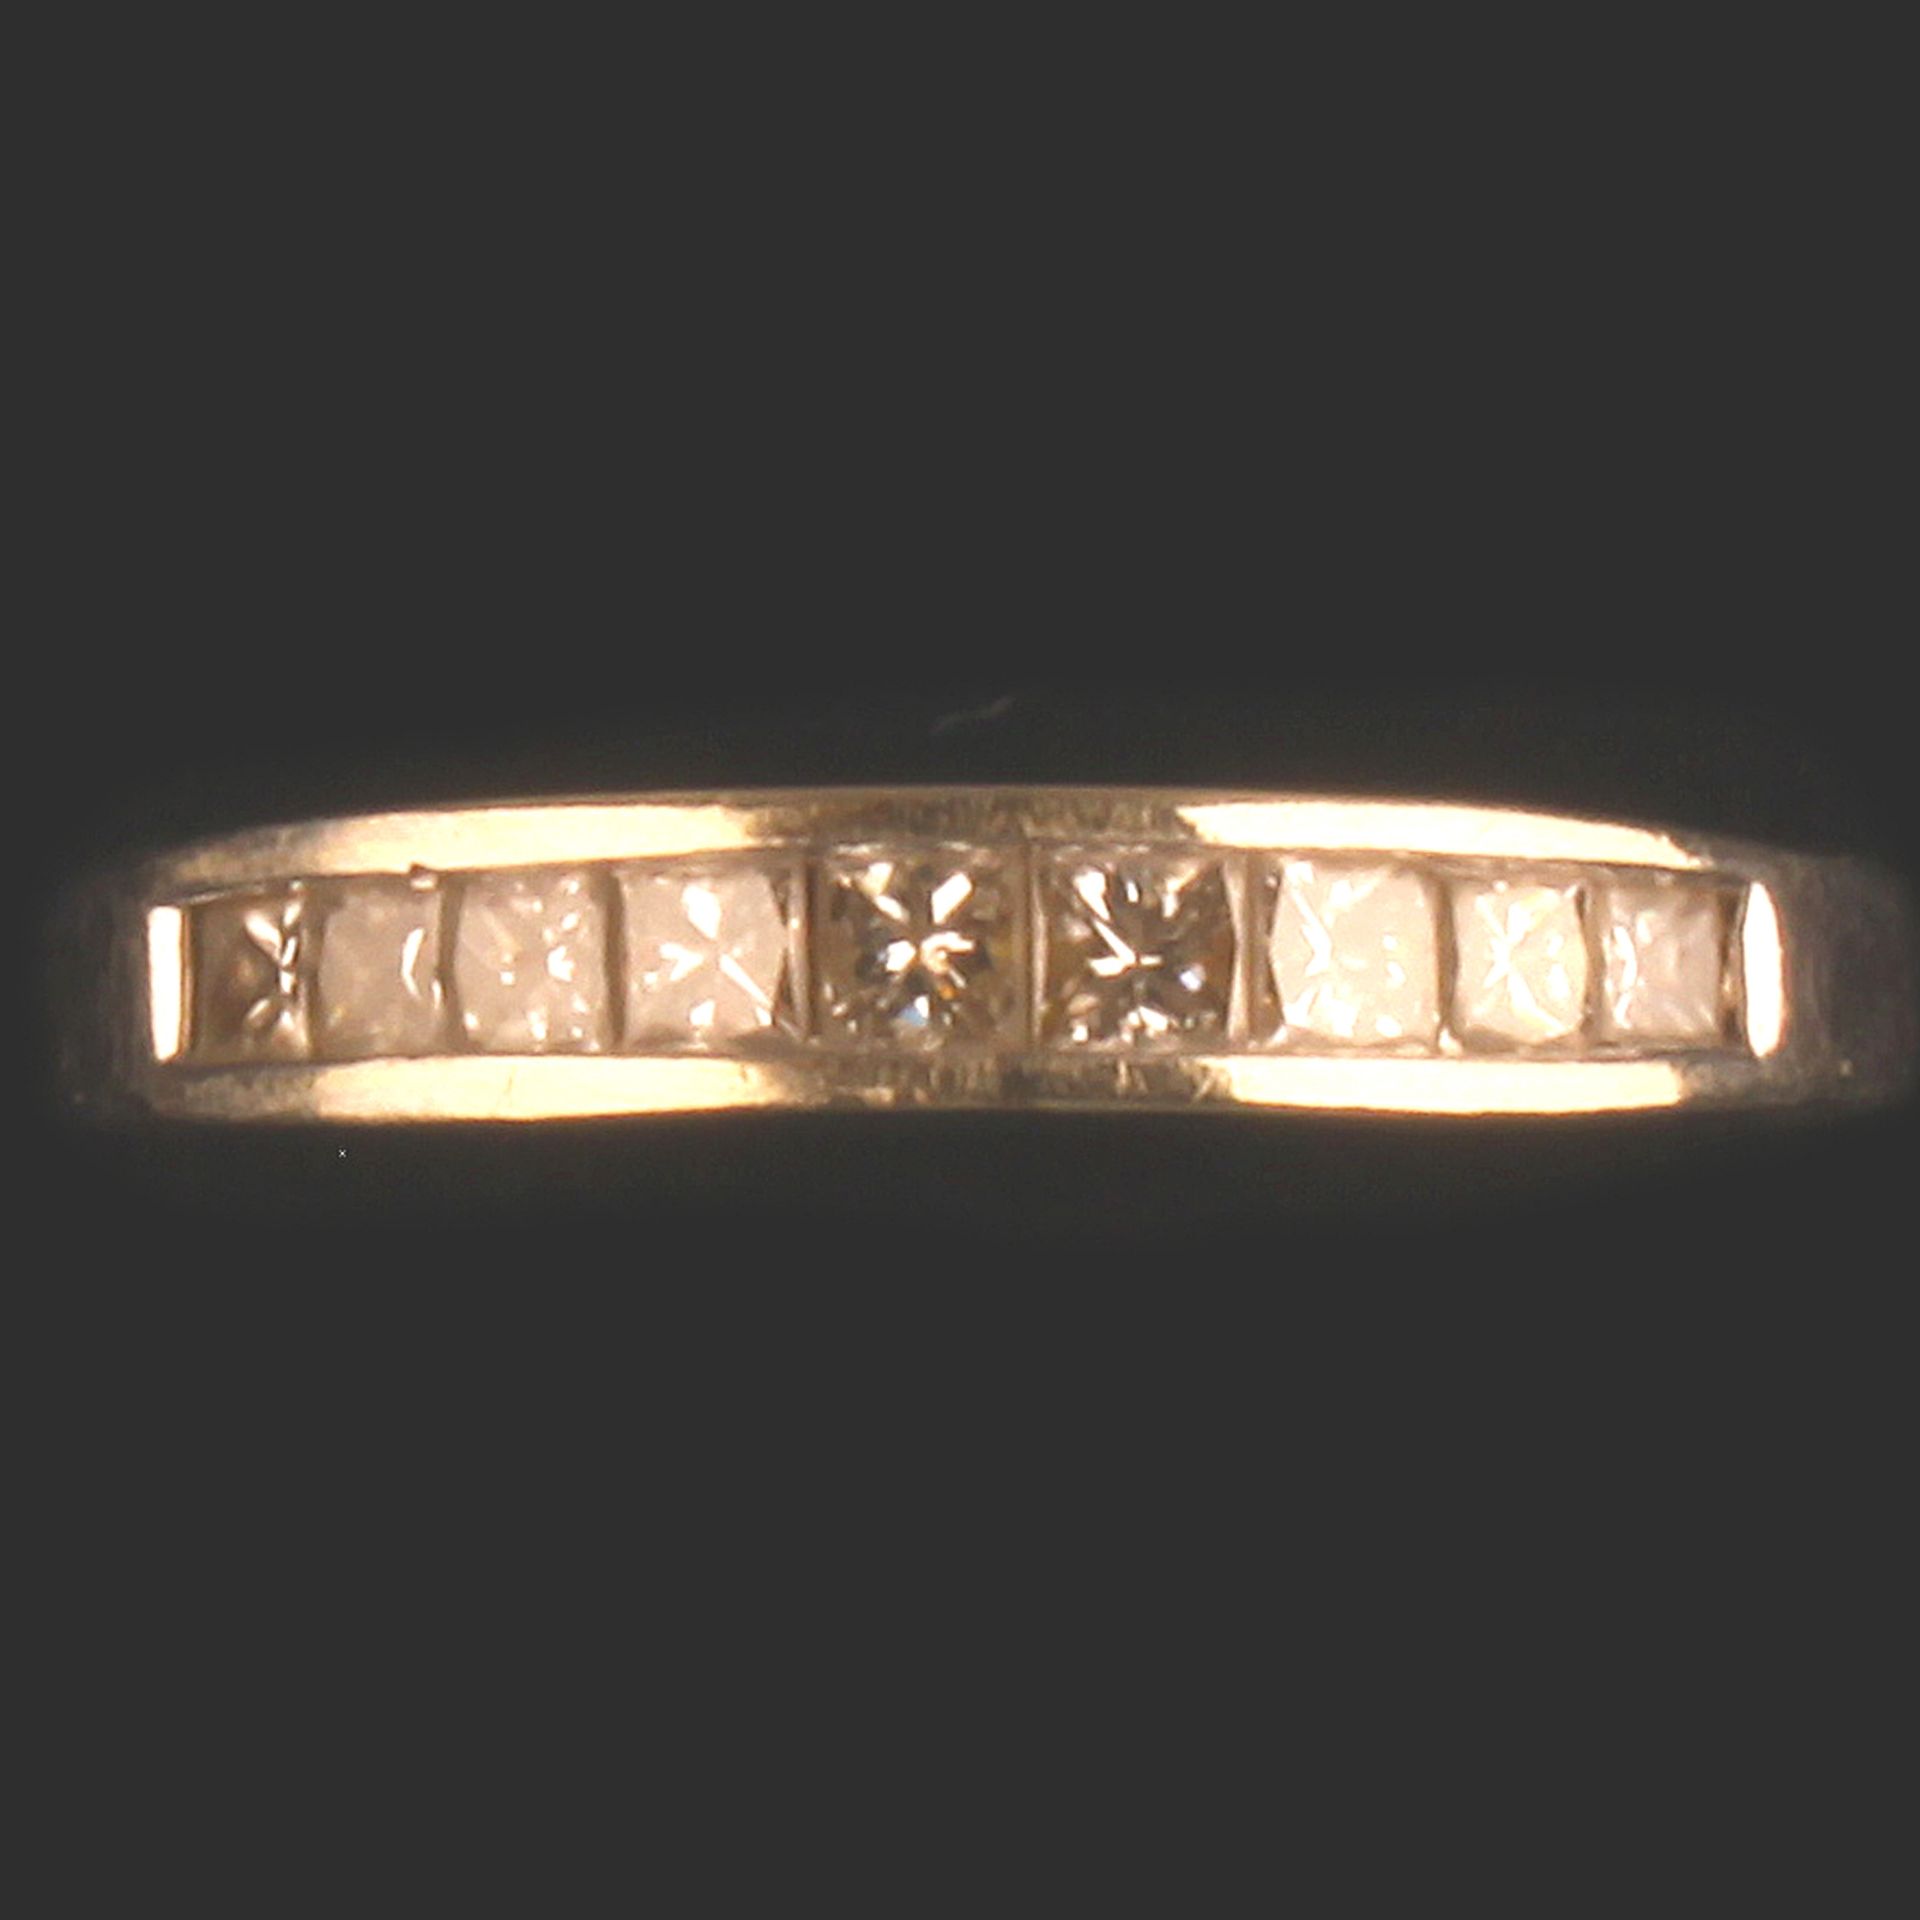 1/2 ETERNITY DIAMOND RING IN WHITE METAL TESTED AS AT LEAST 9ct GOLD - Image 2 of 4